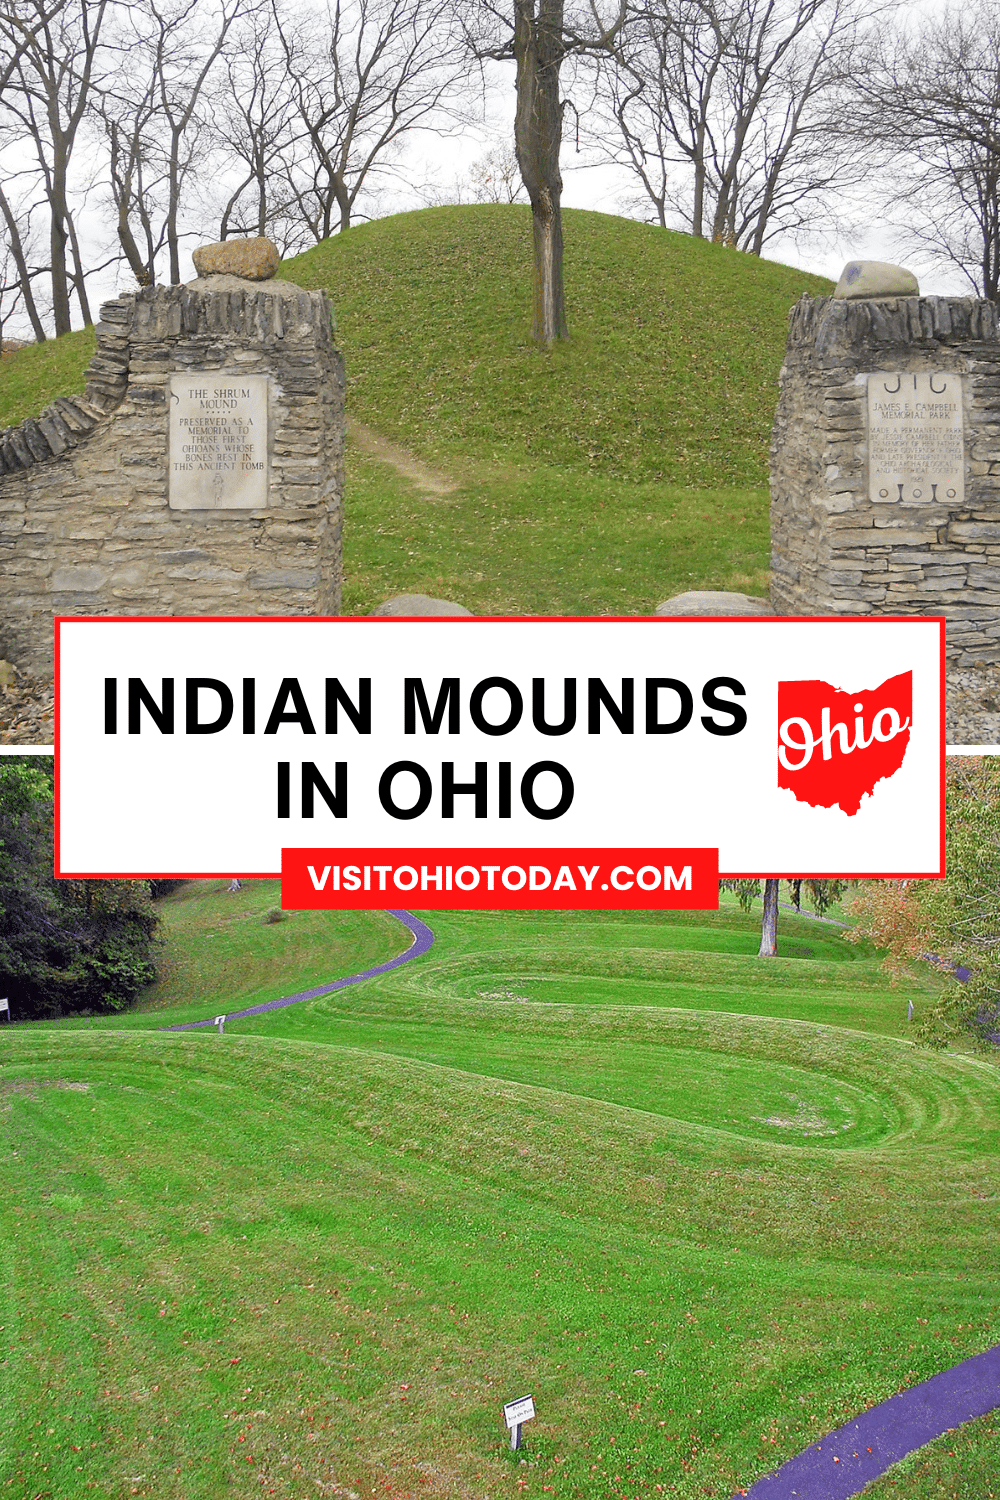 Many years ago, there were thousands of Indian mounds in Ohio. Most of them have been built over, farmed over, or otherwise destroyed, but today there remain over 70 mounds that welcome visitors. The mounds, also known as earthworks, were built over 2,000 years ago, normally for ceremonial purposes, sometimes as burial mounds.